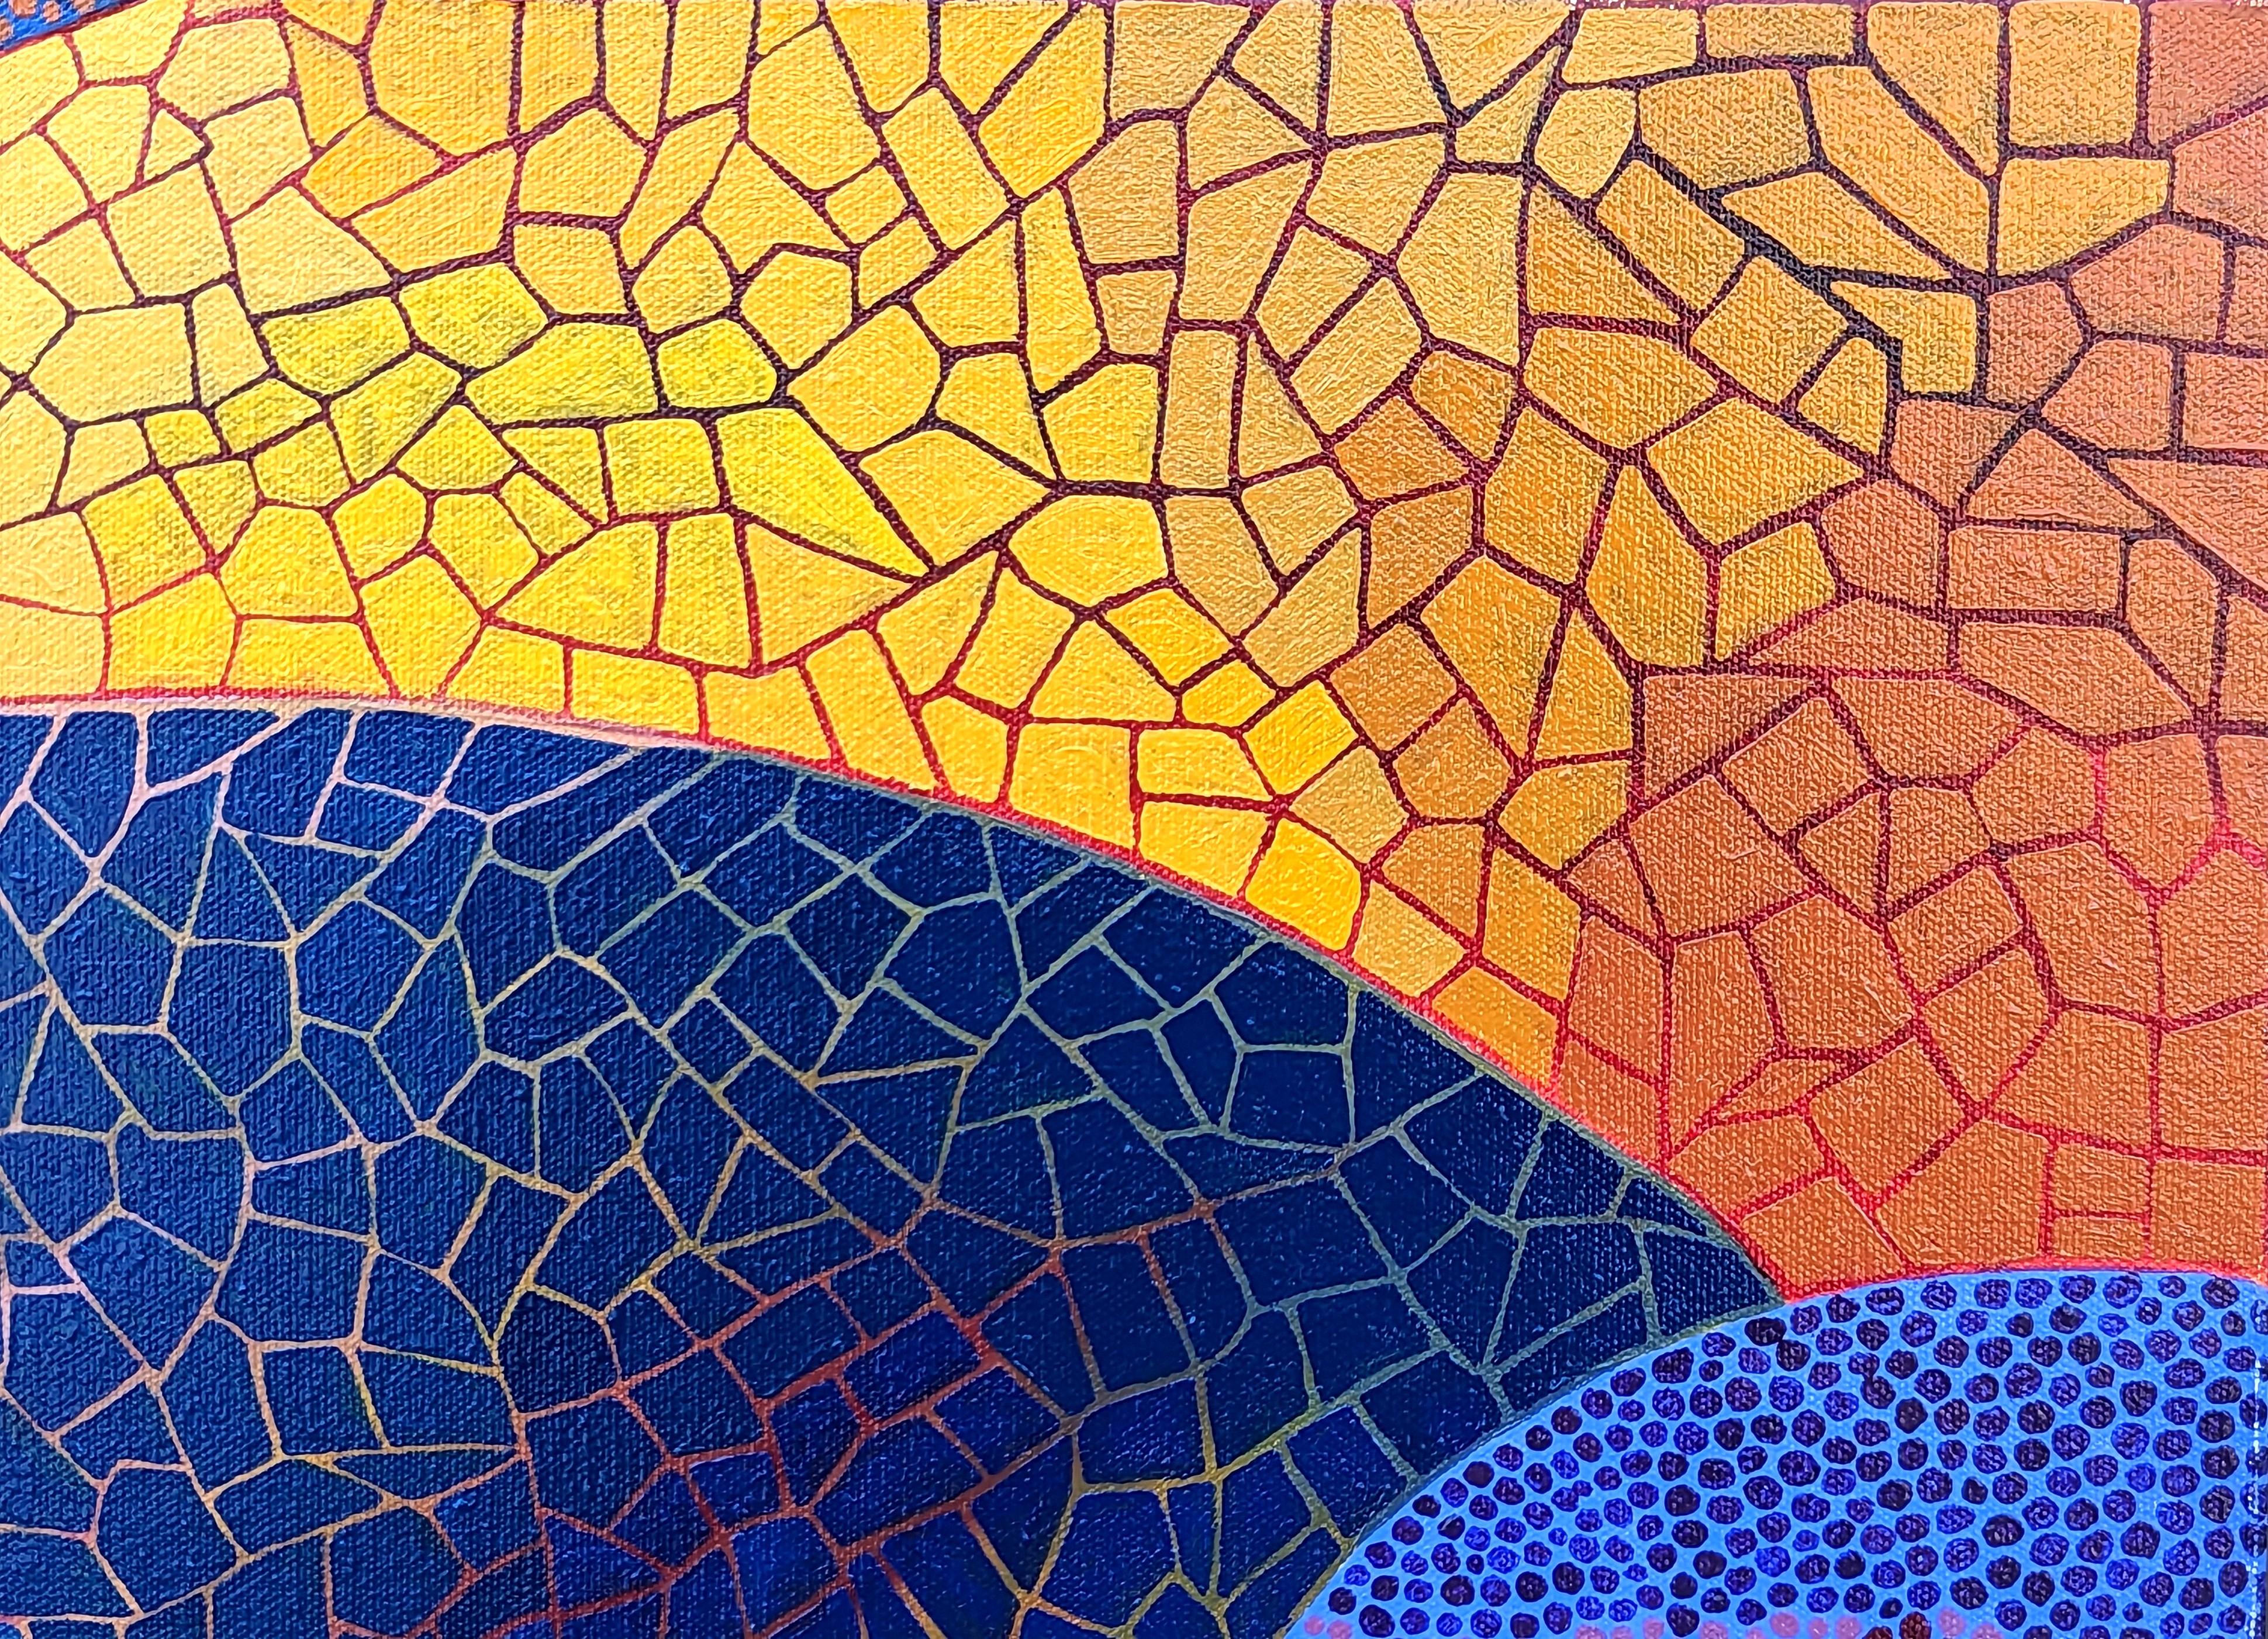 Blue, yellow, orange, and red abstract painting by Houston, TX artist Marguerite Baldwin. The painting depicts several overlapping shapes with different patterns. Each mosaic 